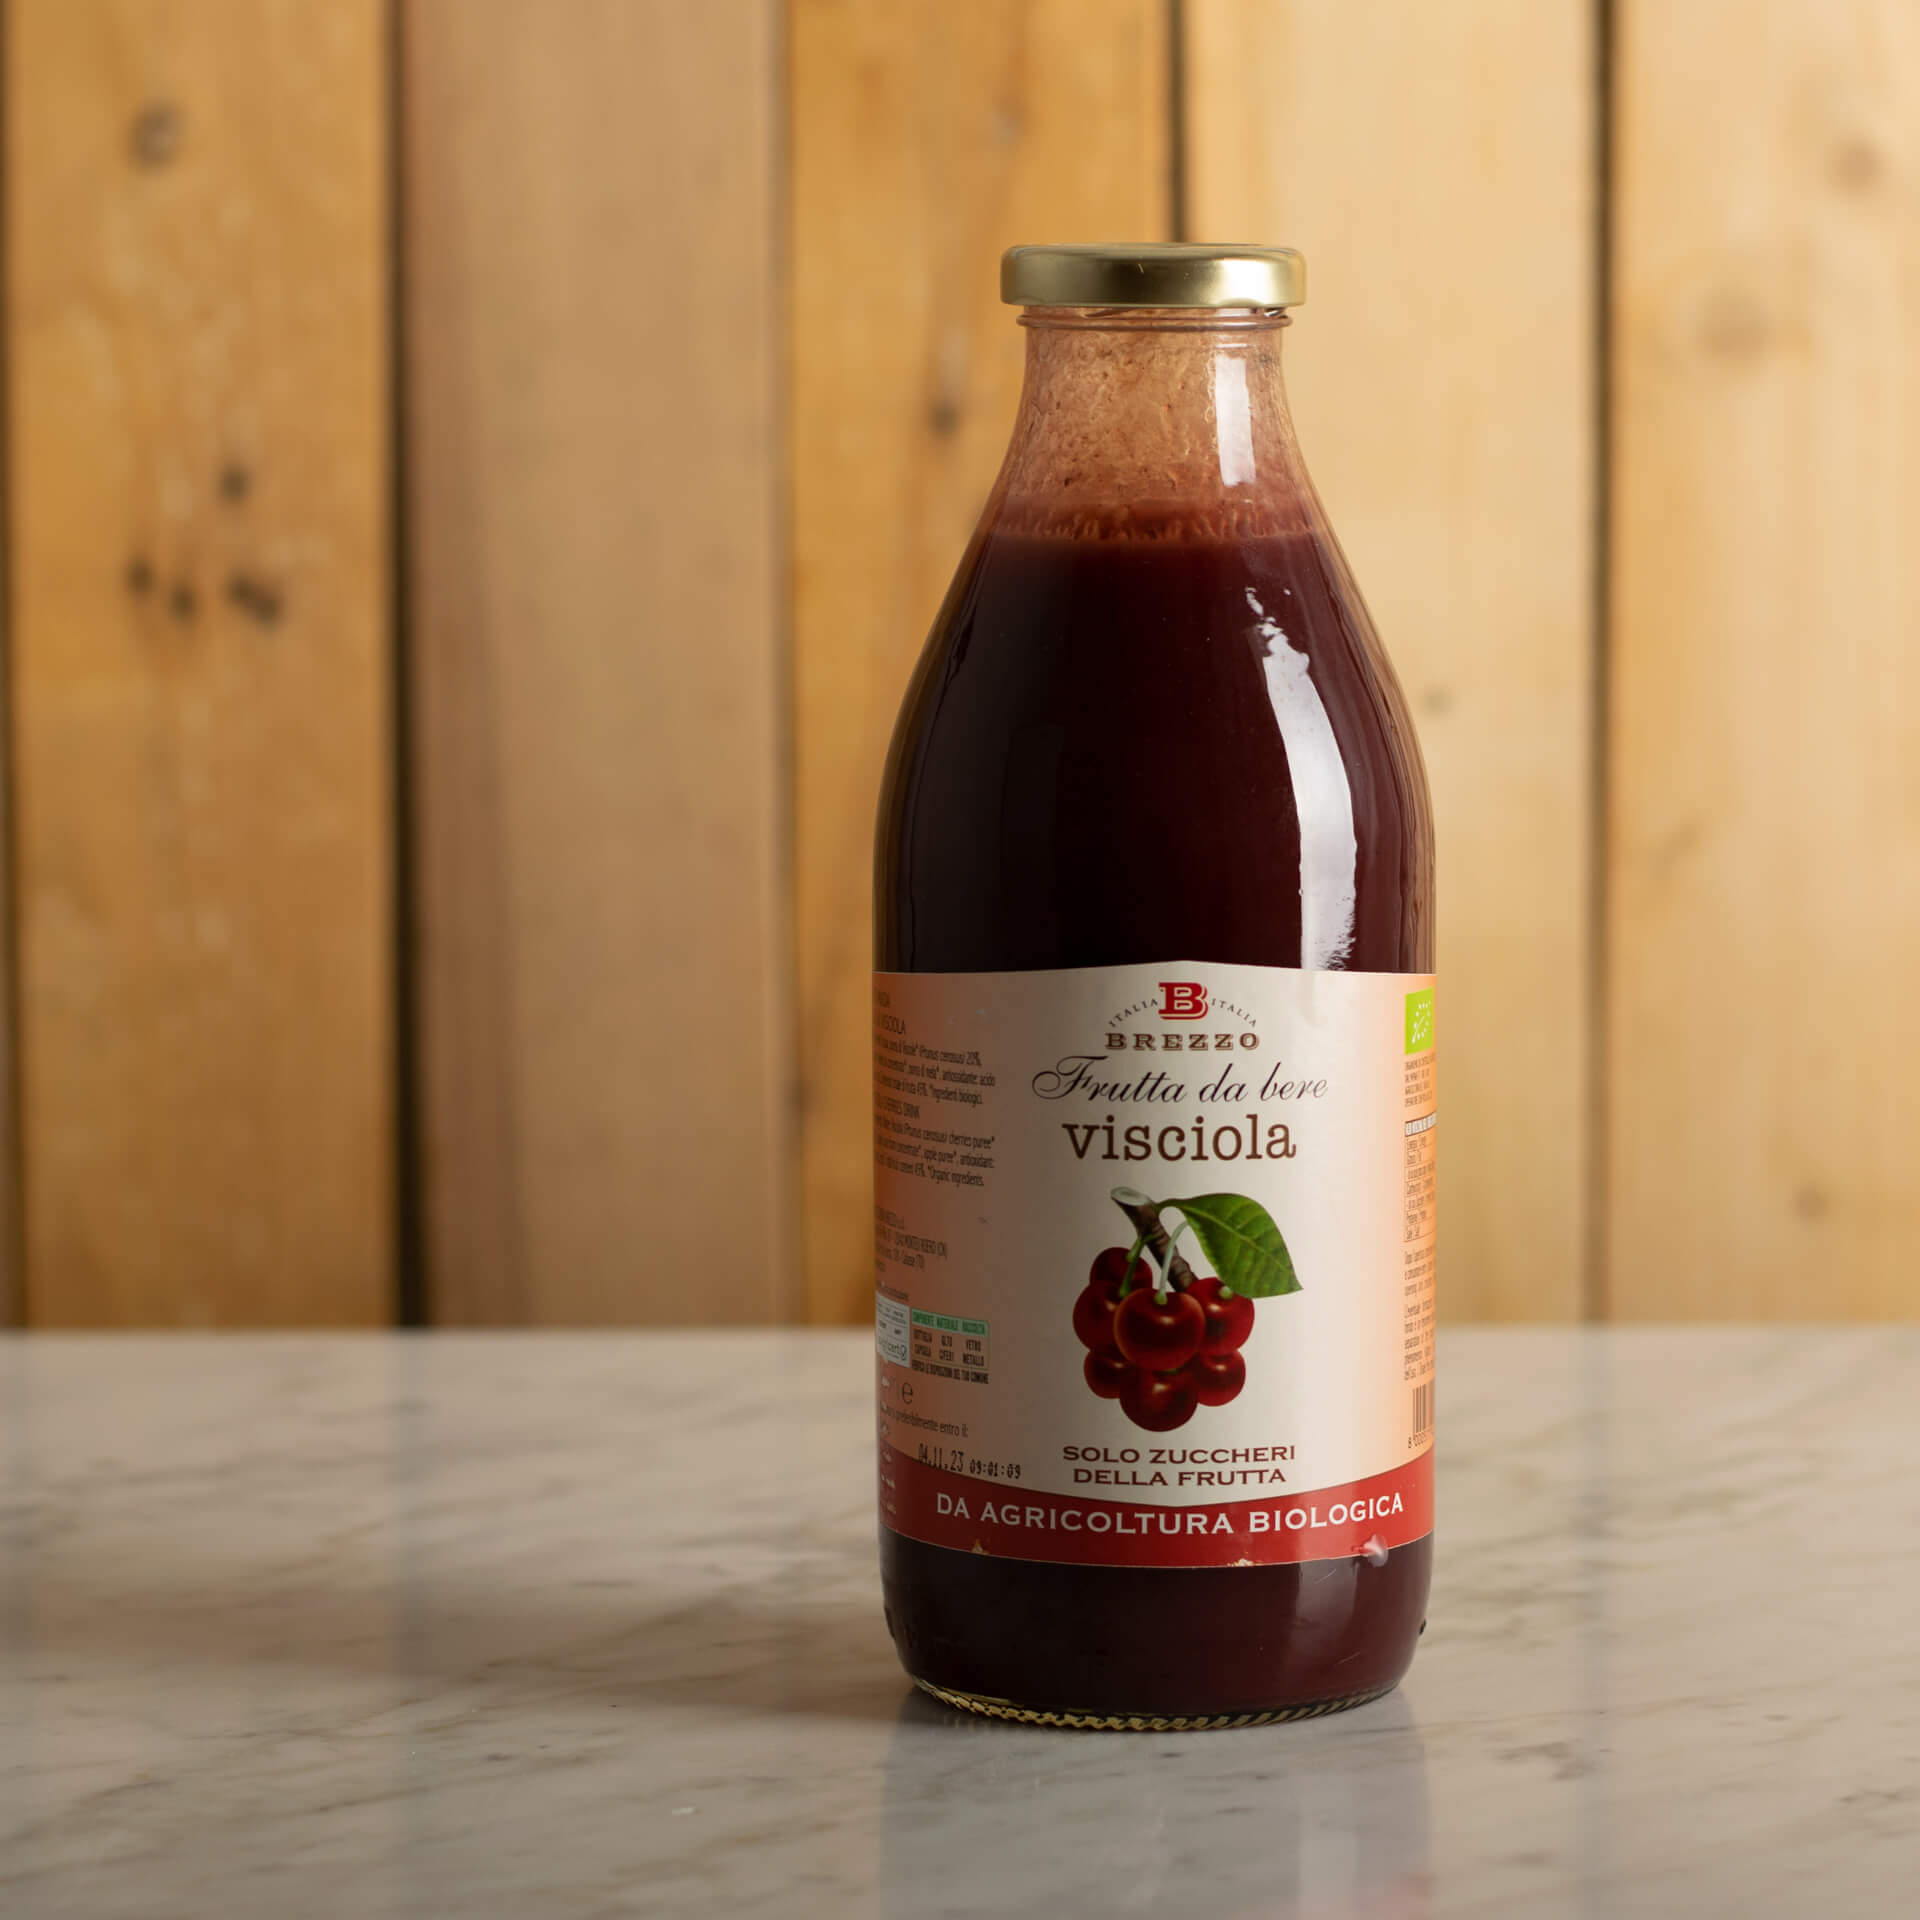 Organic Sour cherry Fruit to drink